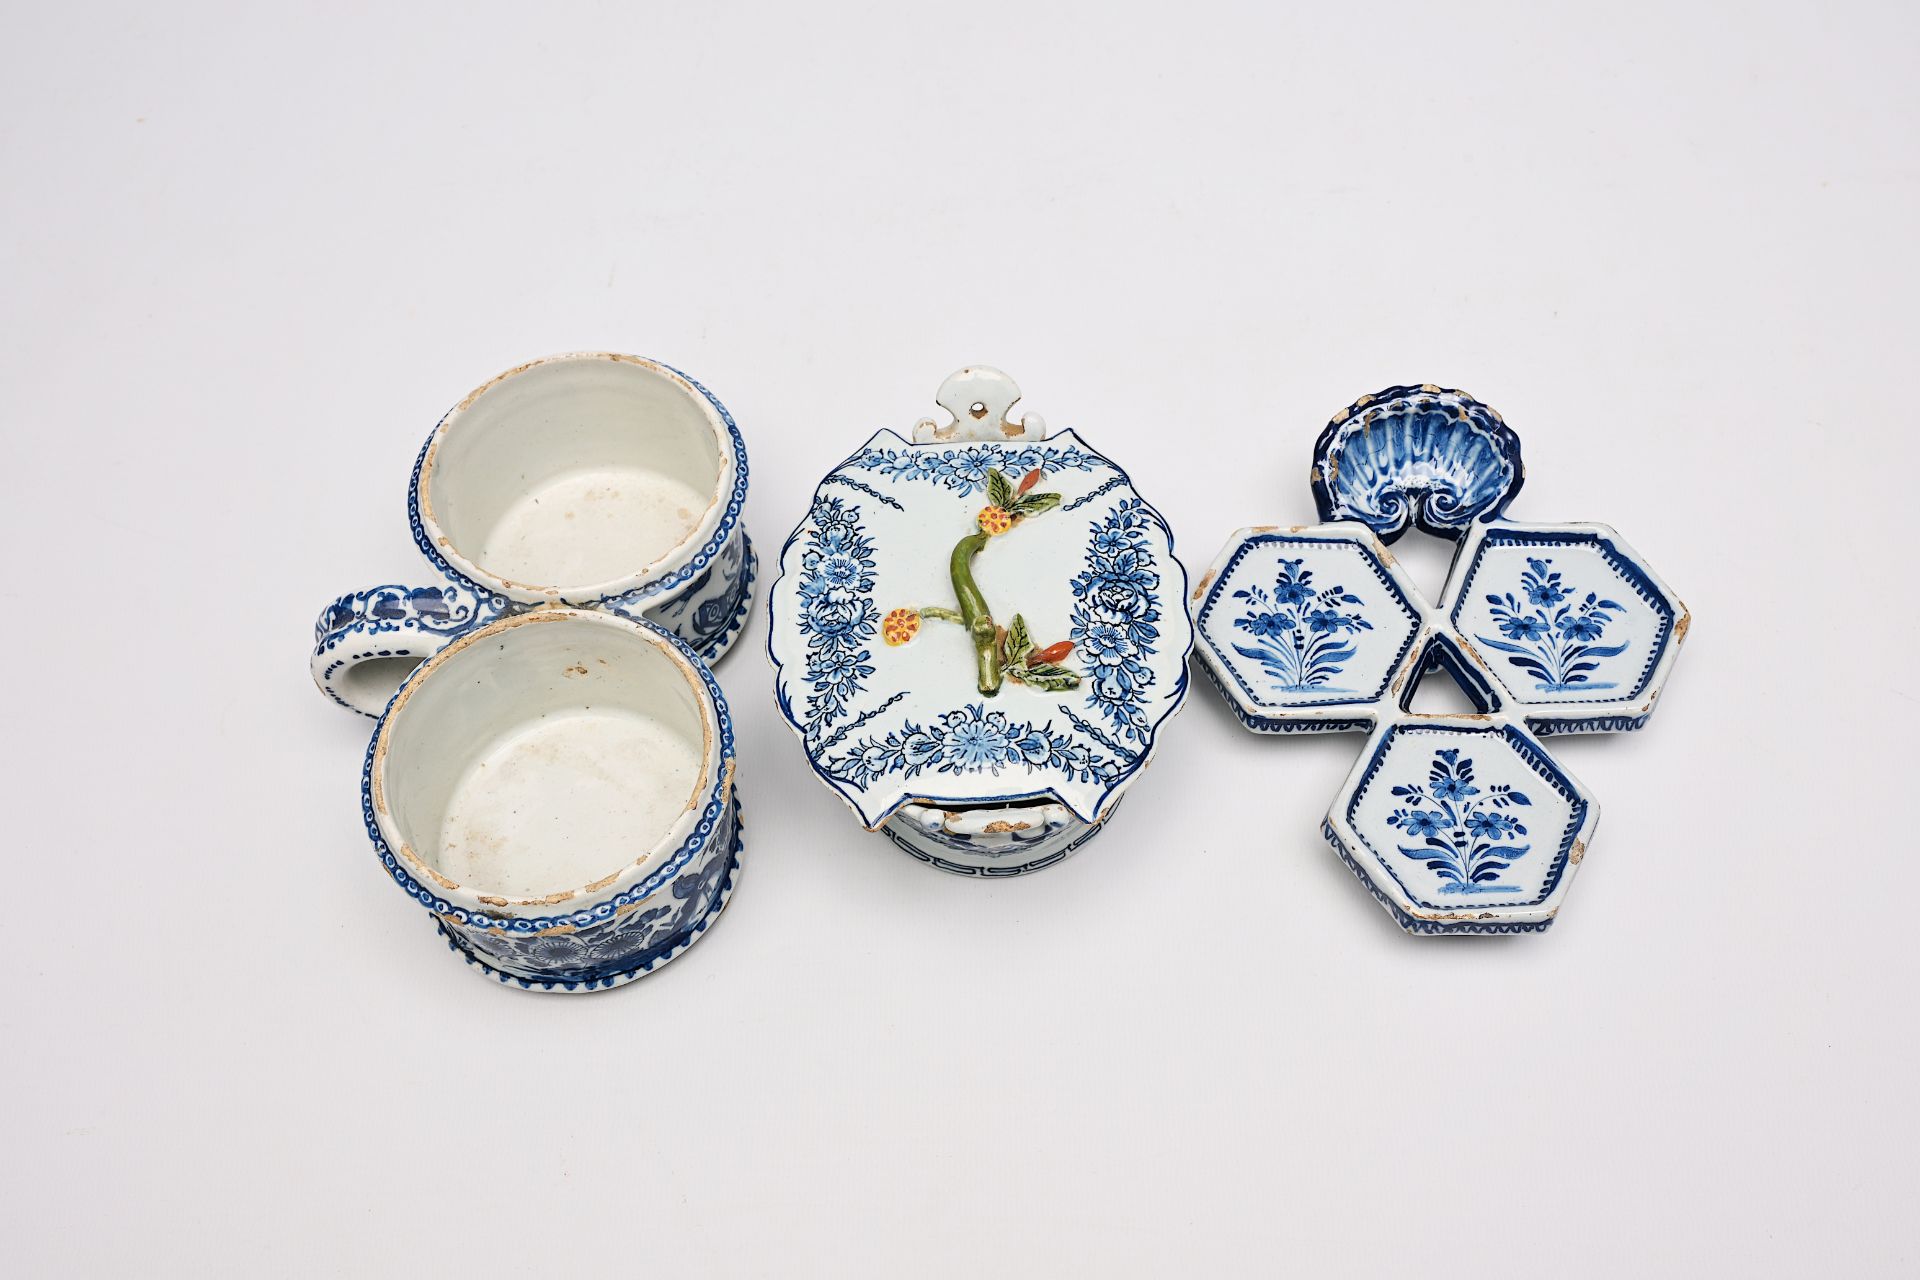 A Dutch Delft blue and white butter tub, an oil and vinegar holder and a spice dish with floral desi - Bild 7 aus 9